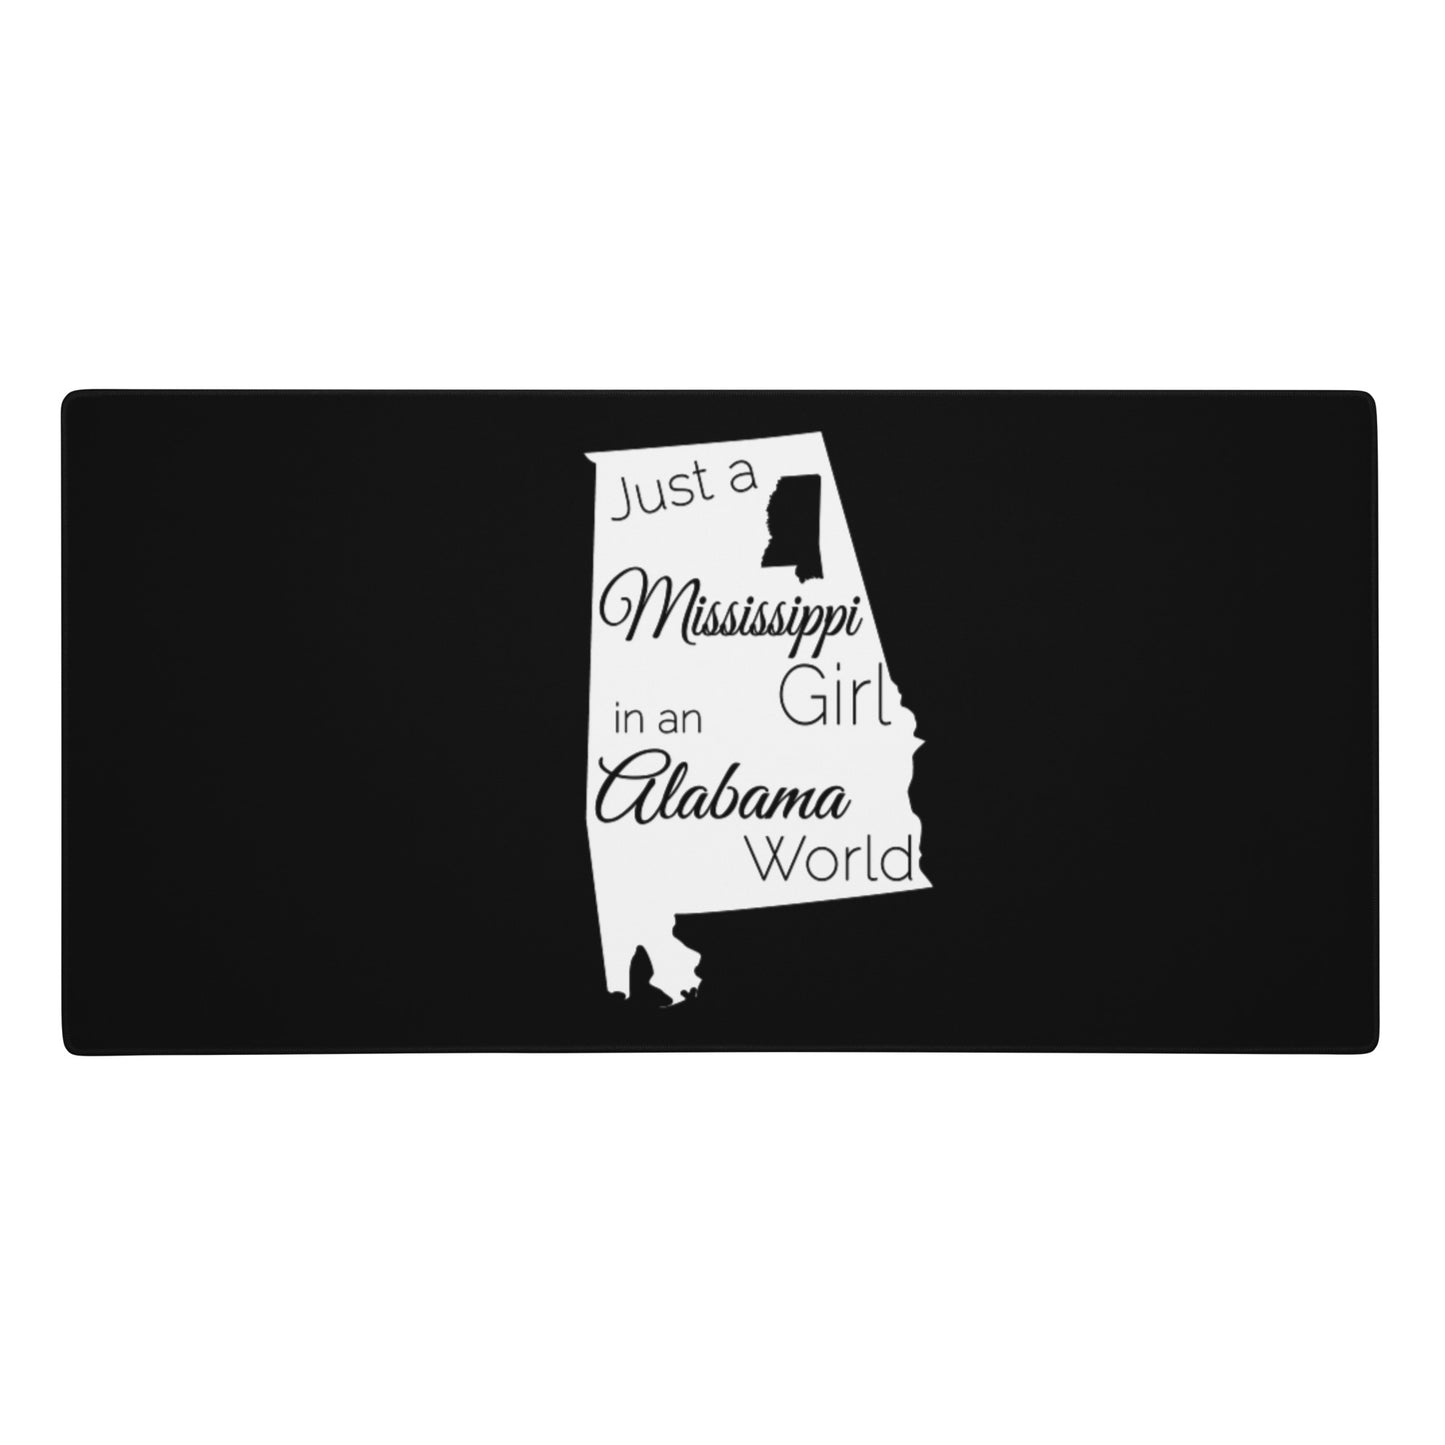 Just a Mississippi Girl in an Alabama World Gaming mouse pad